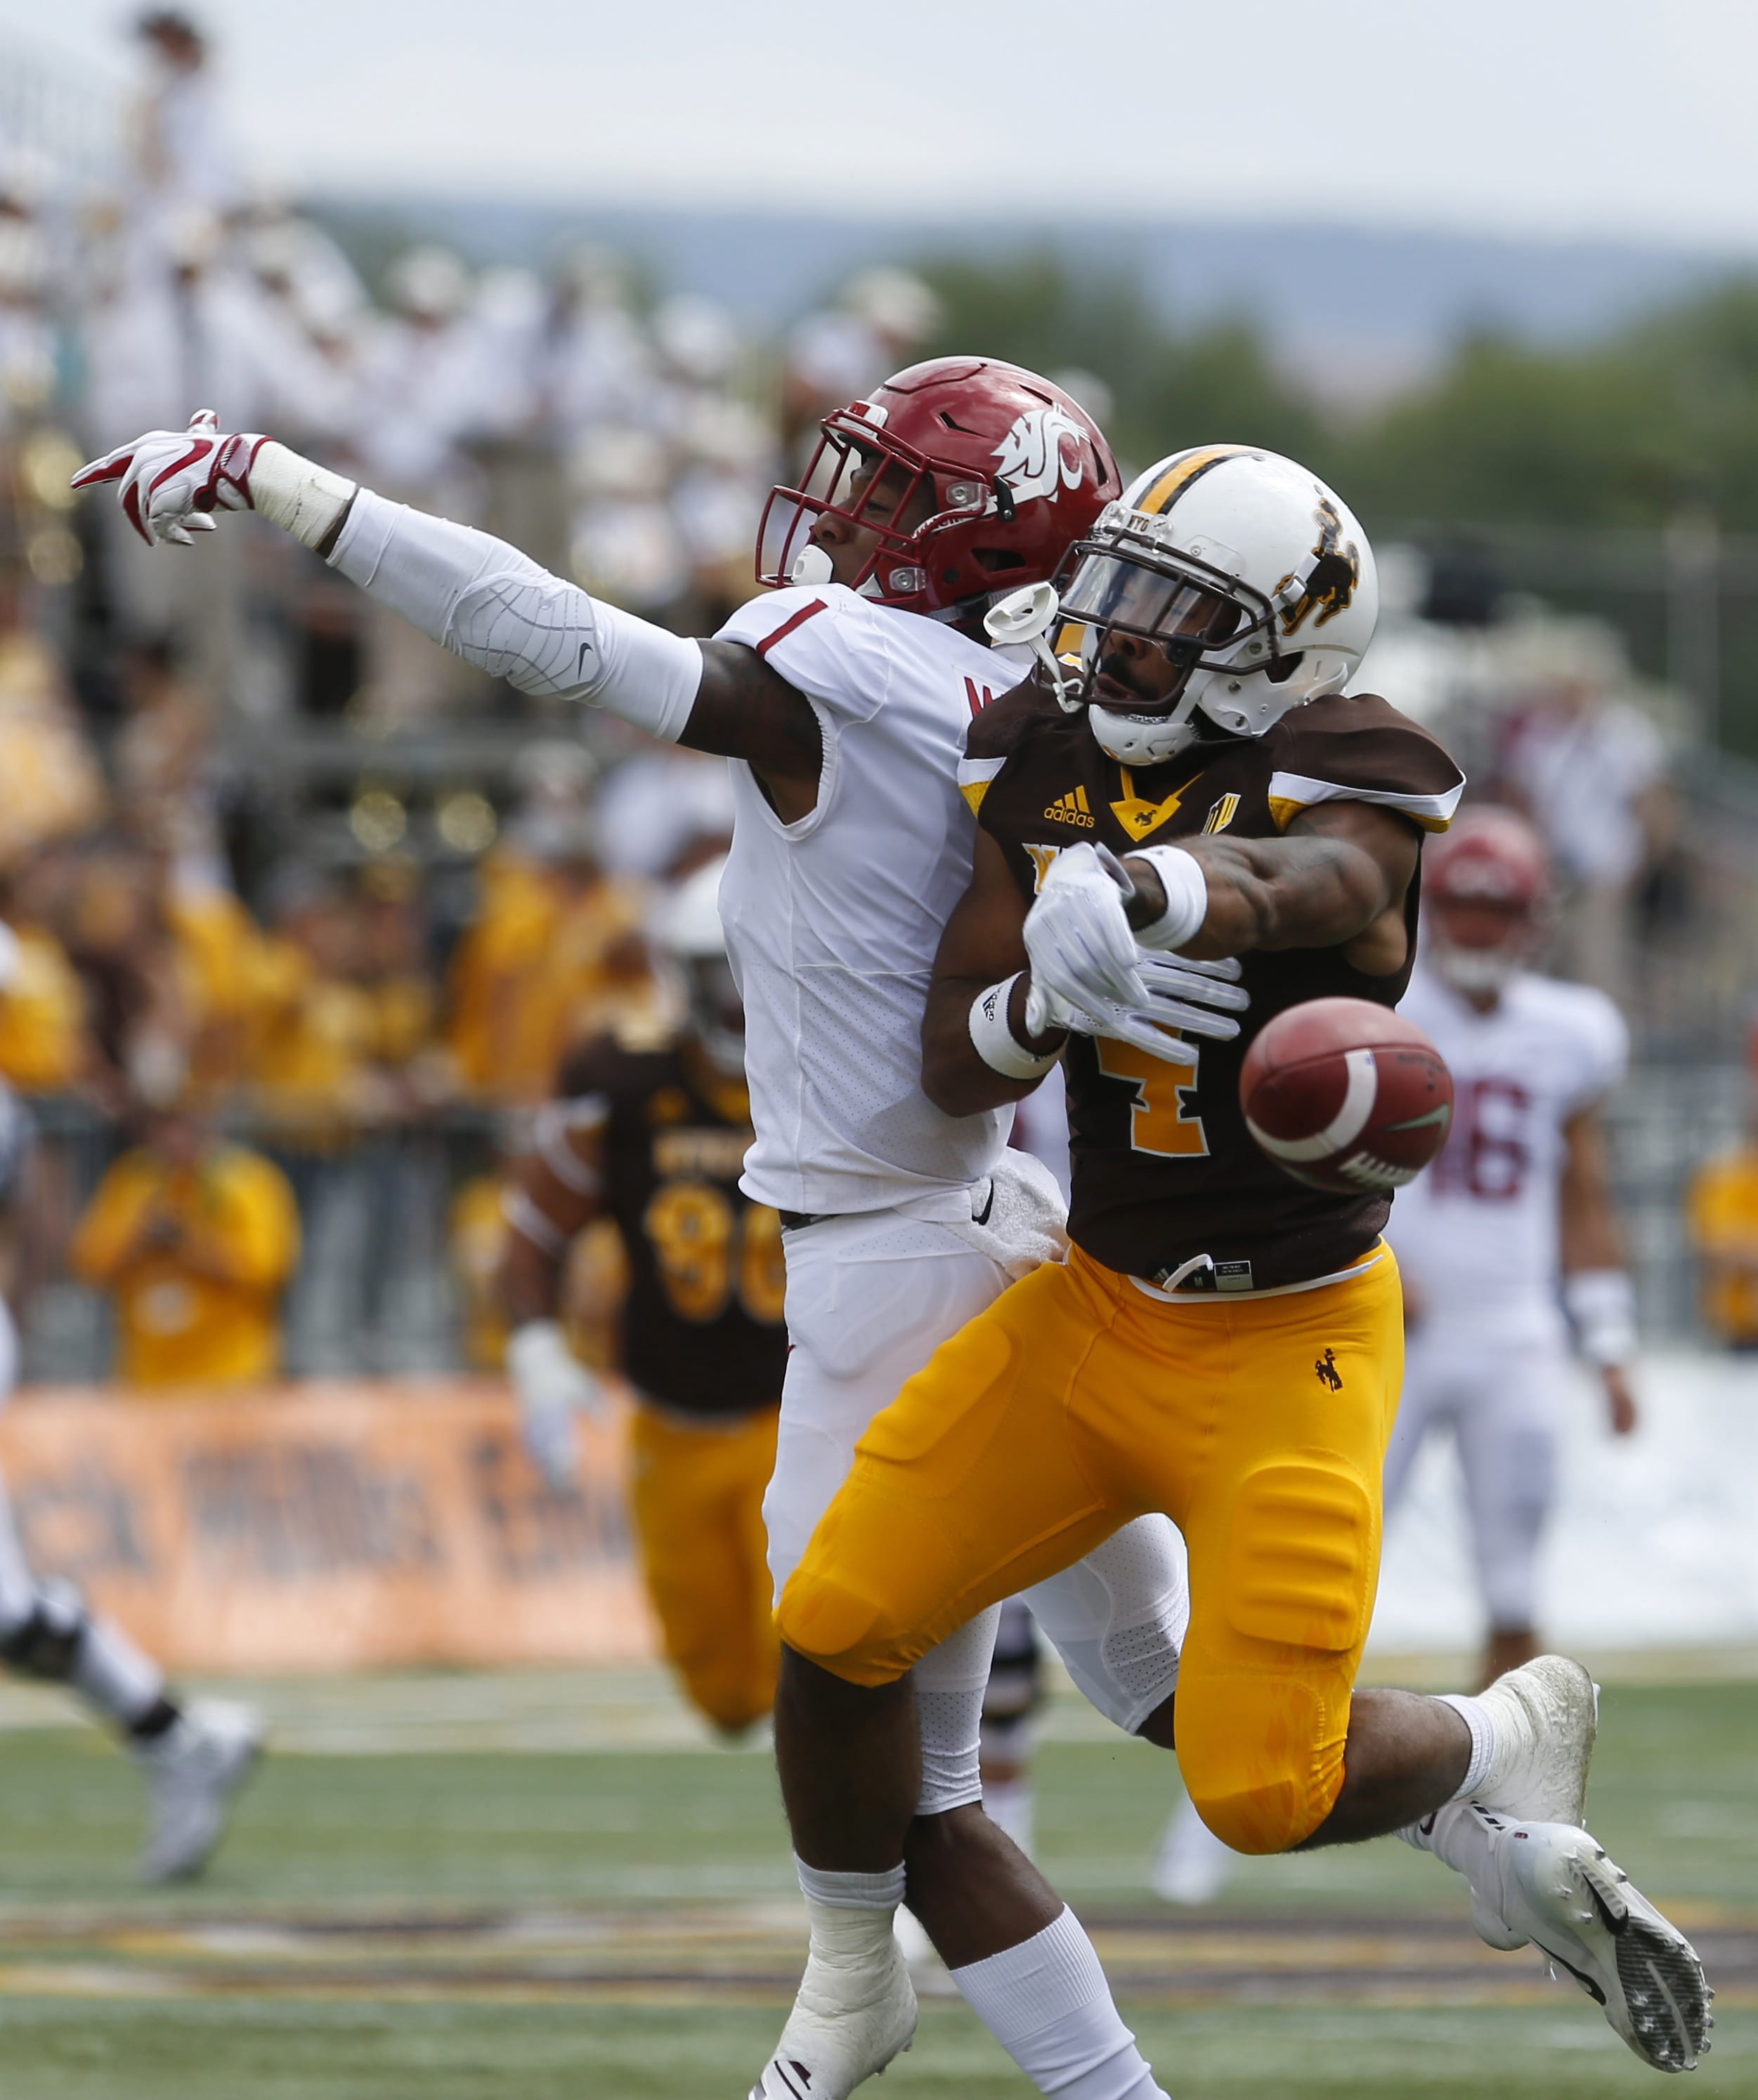 Wyoming's Antonio Hull, right, breaks up a pass intended for Washington State's Tay Martin during an NCAA college football game Saturday, Sept. 1, 2018, in Laramie, Wyo. Washington State defeated Wyoming 41-19.